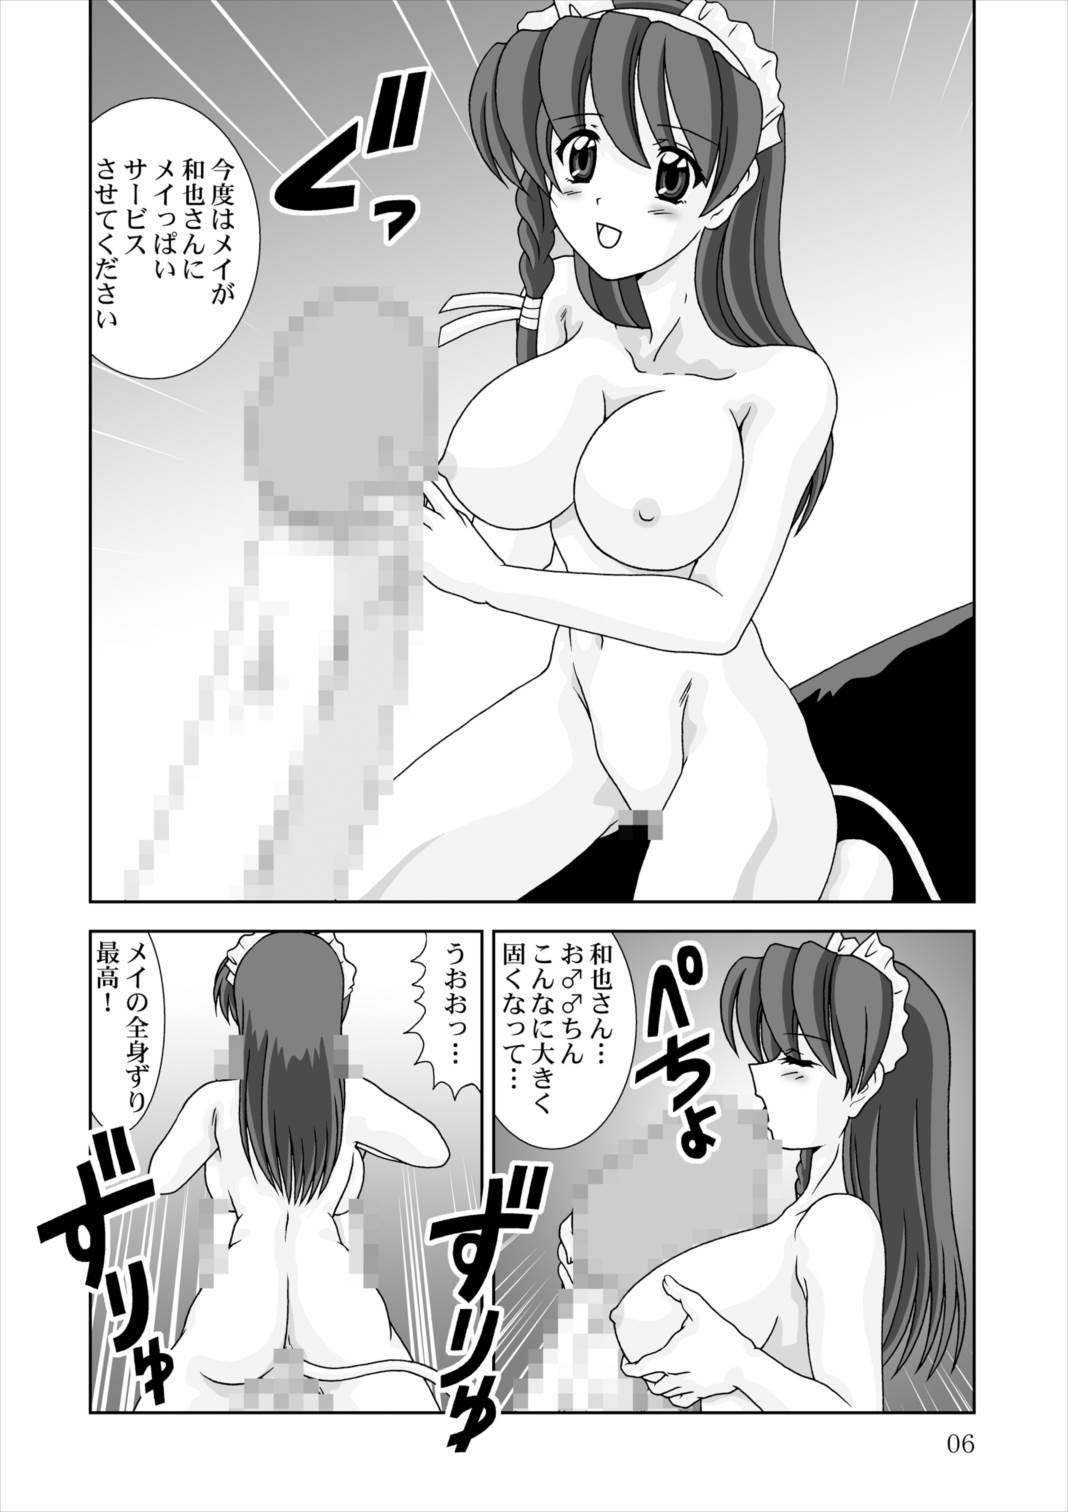 Best Blowjob Shiboritate - Hand maid may Gay Physicals - Page 6